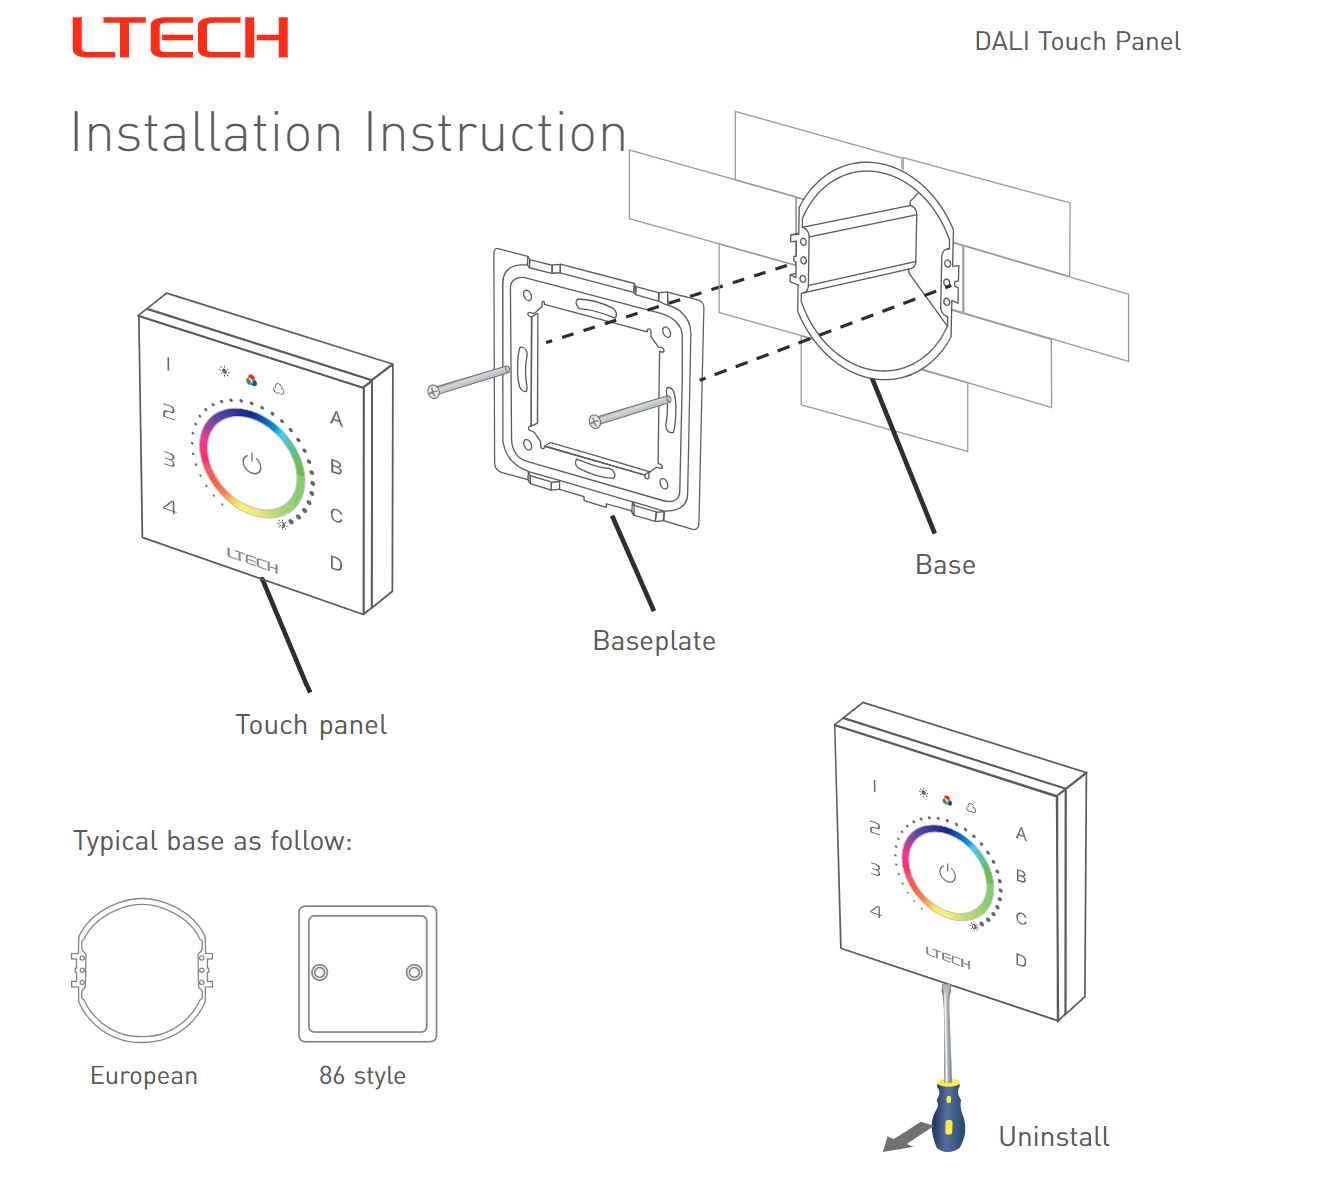 Ltech_EDT2_DALI_CT_Touch_Panel_Master_Led_Controller_3